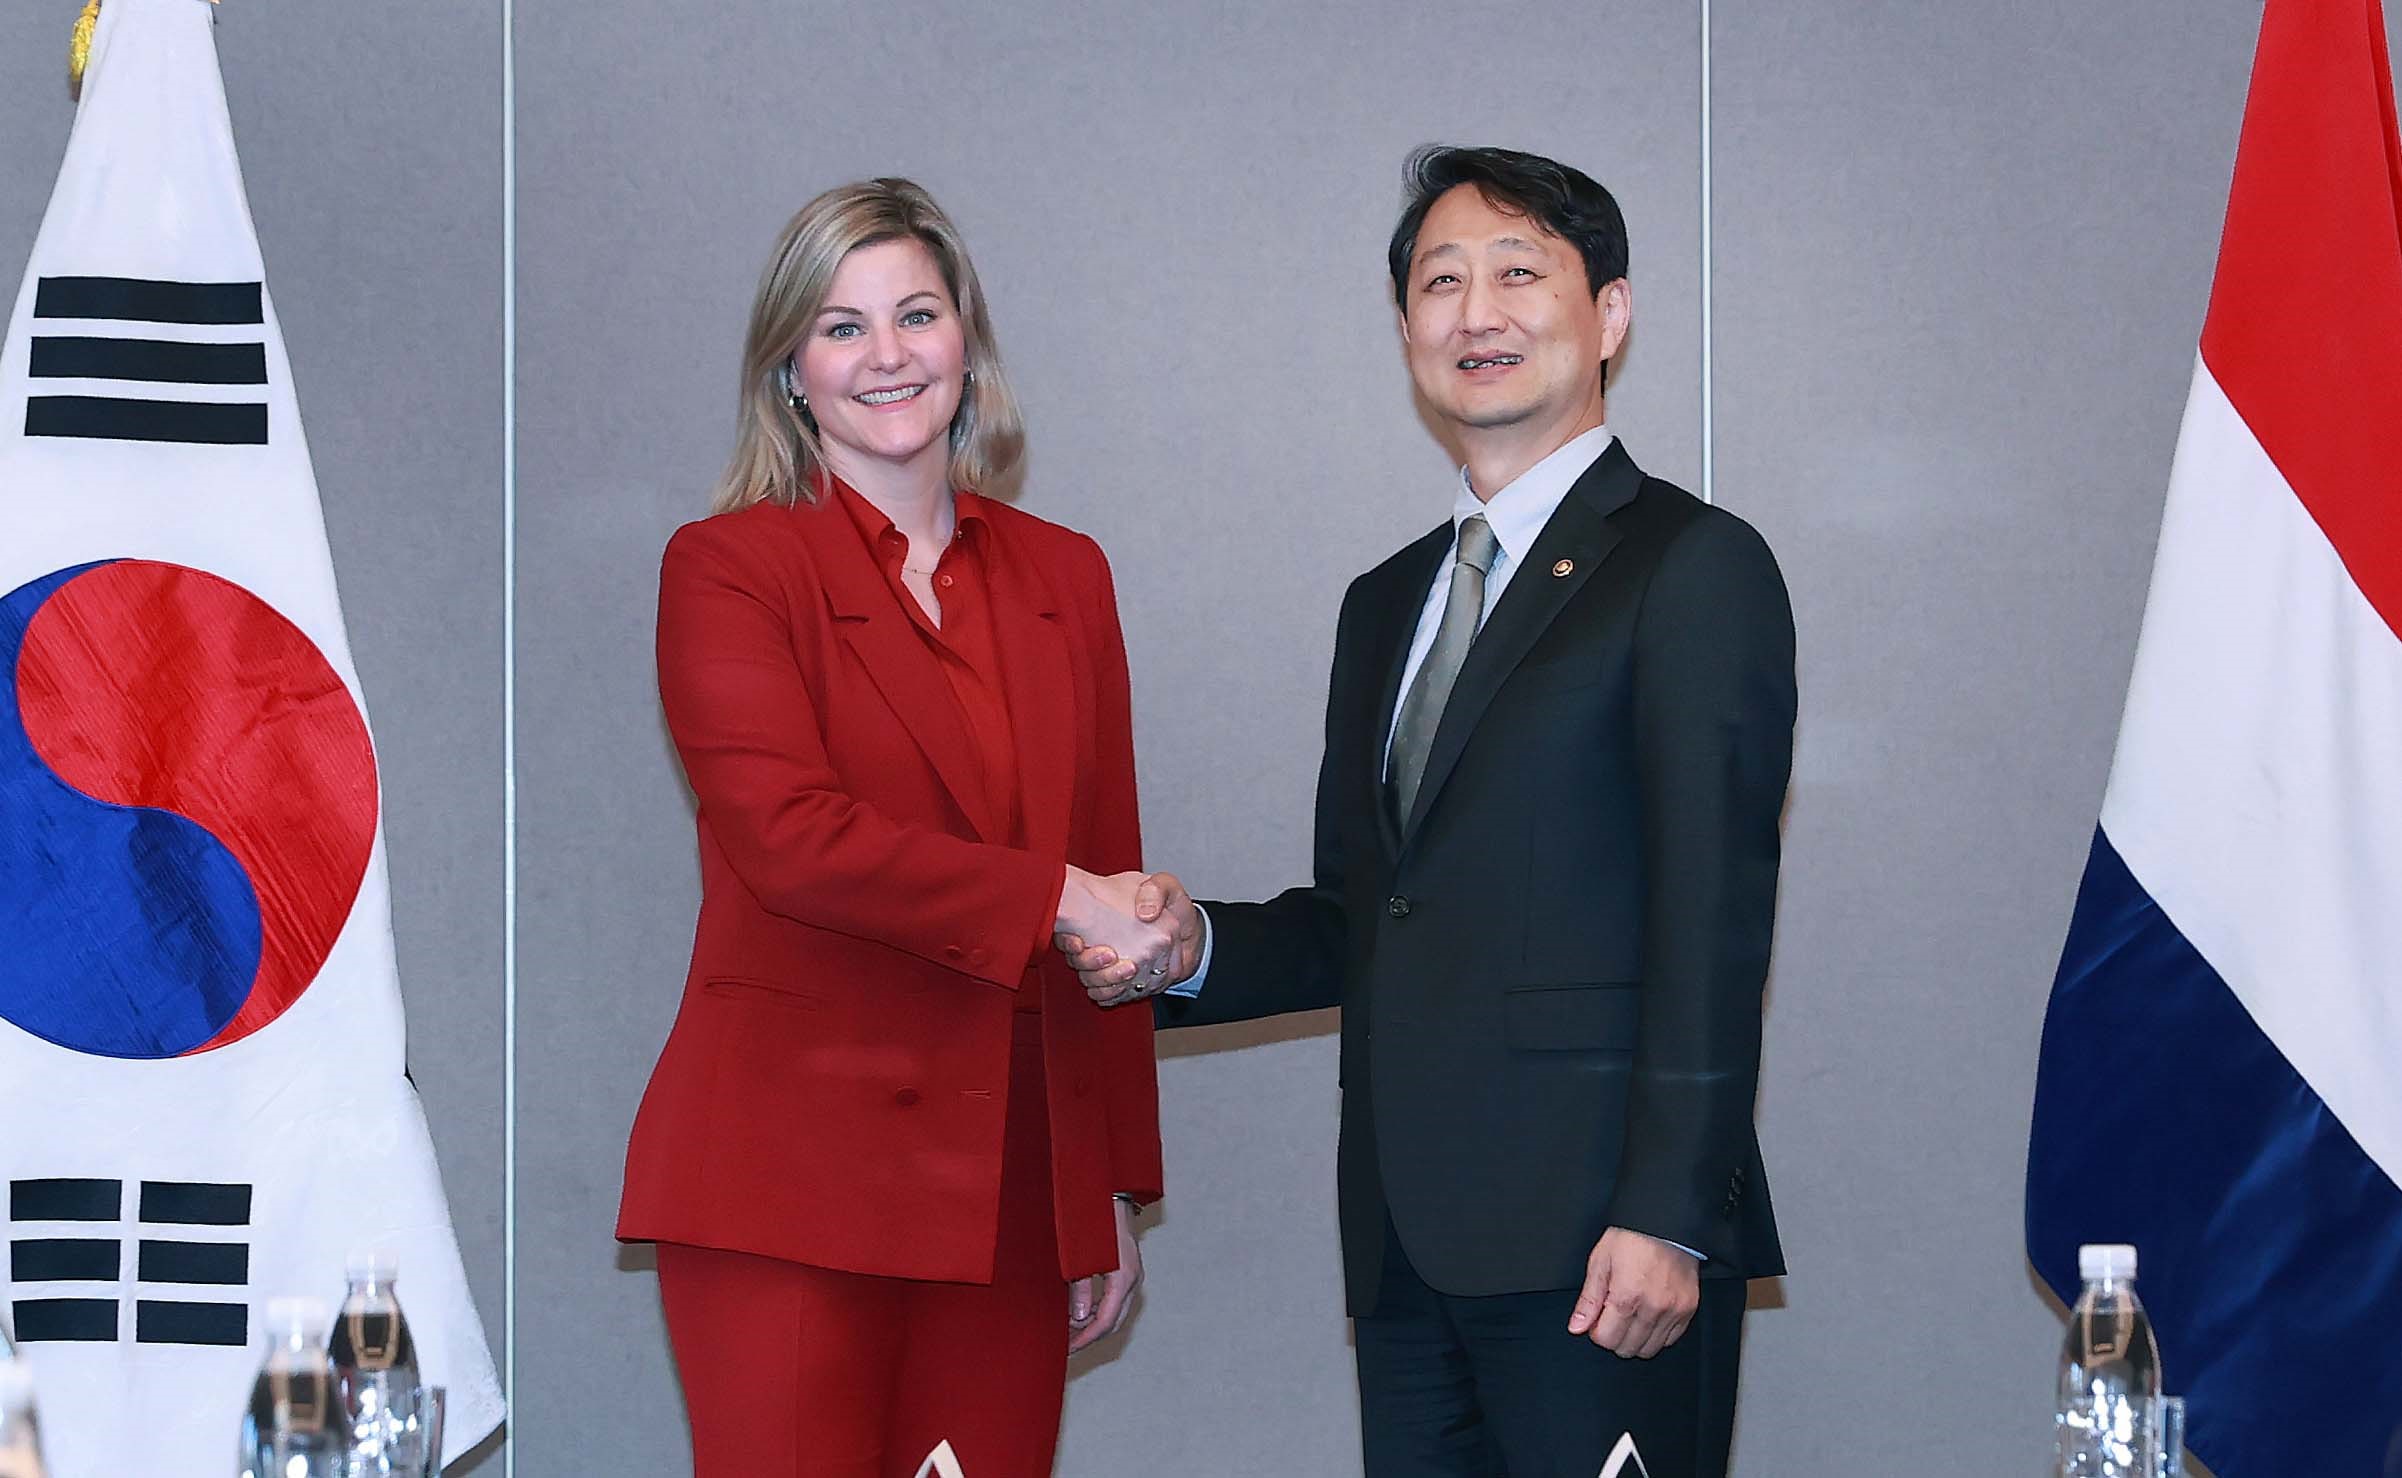 Korea and Netherlands discuss cooperation in trade, energy & investment Image 0